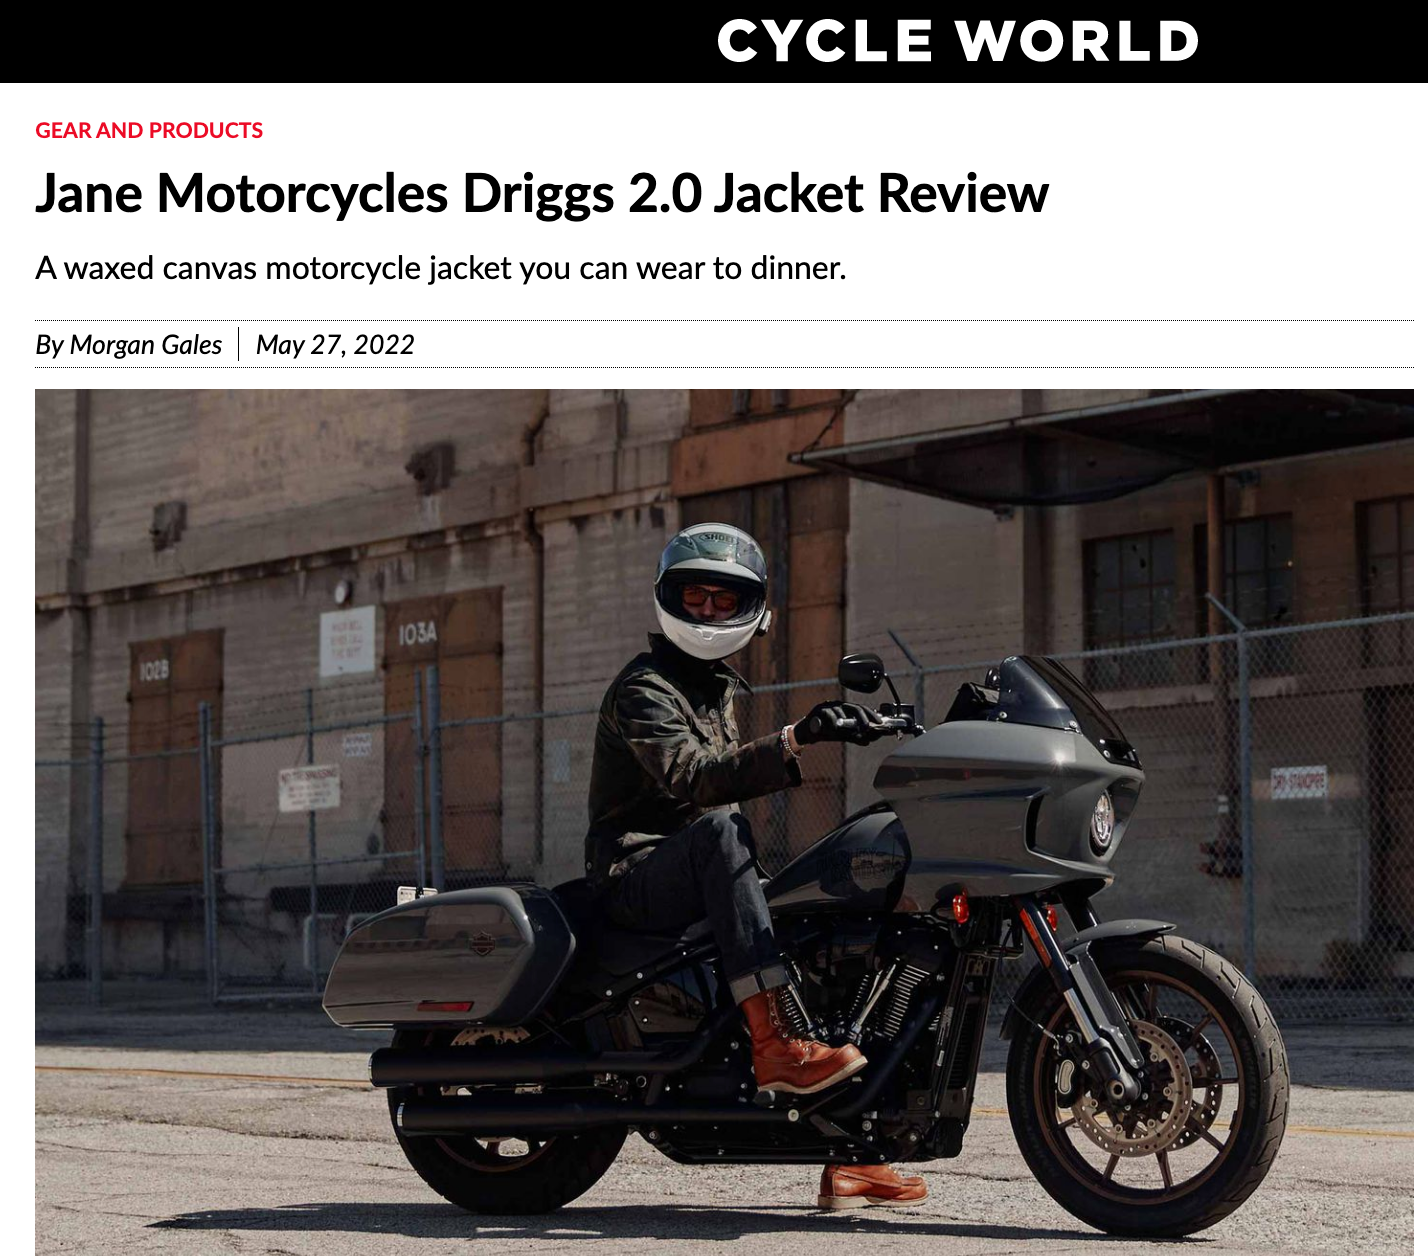 Cycle World X Driggs Jacket Review